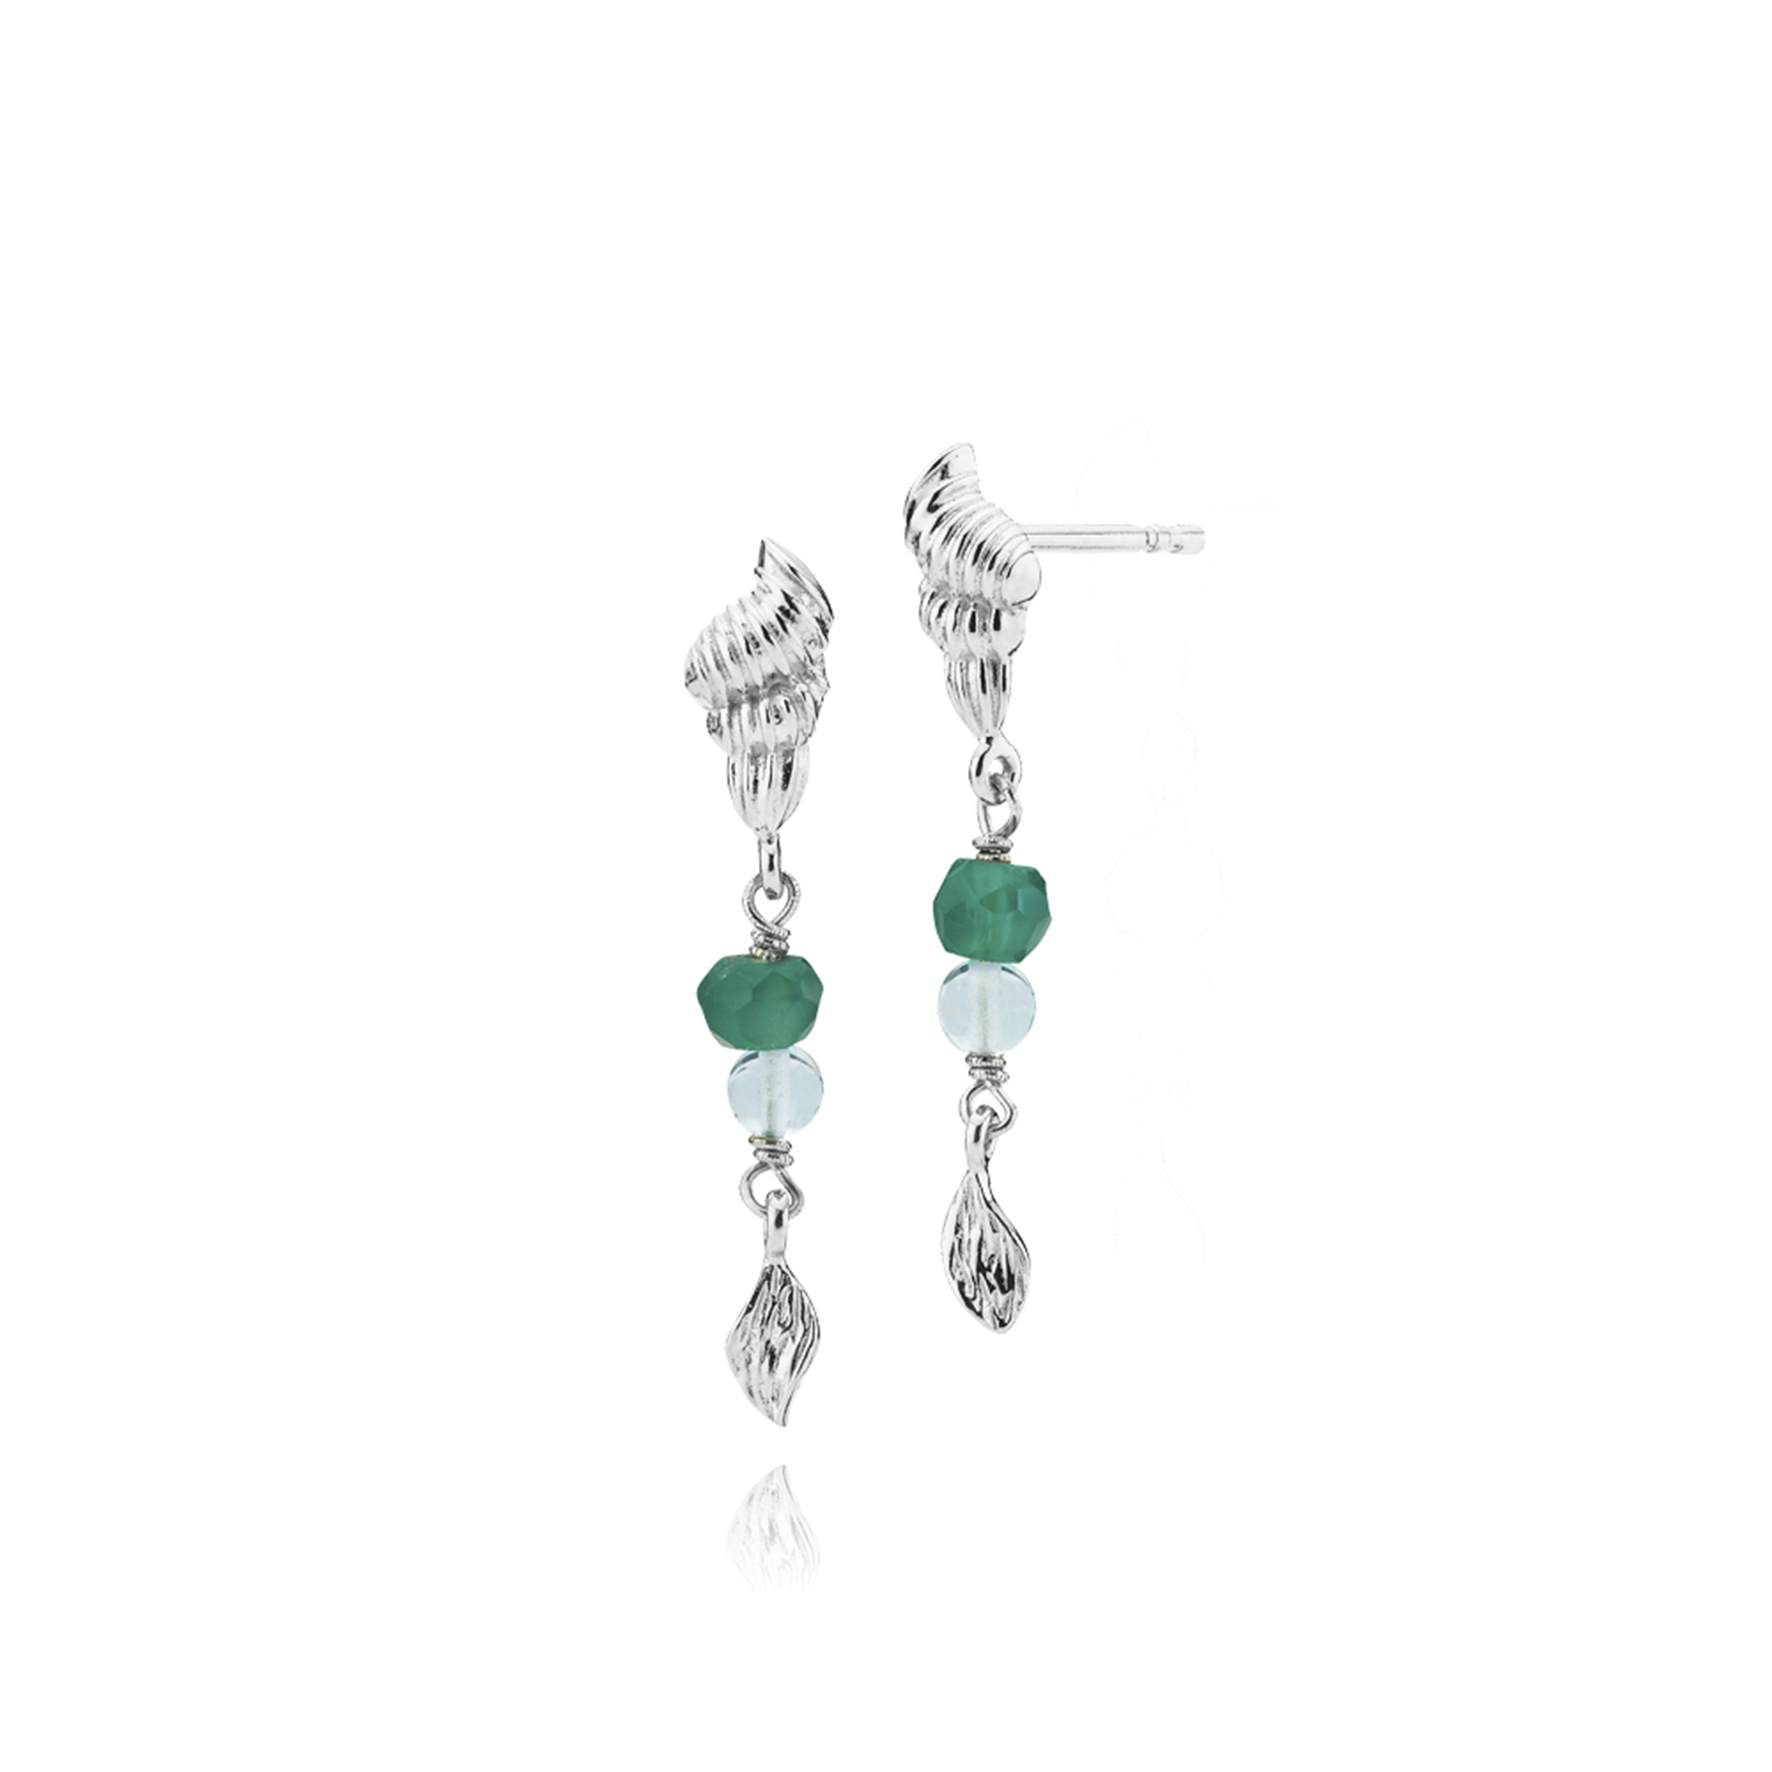 Kaia Earrings Green Onyx and Aqua Crystal from Sistie in Silver Sterling 925